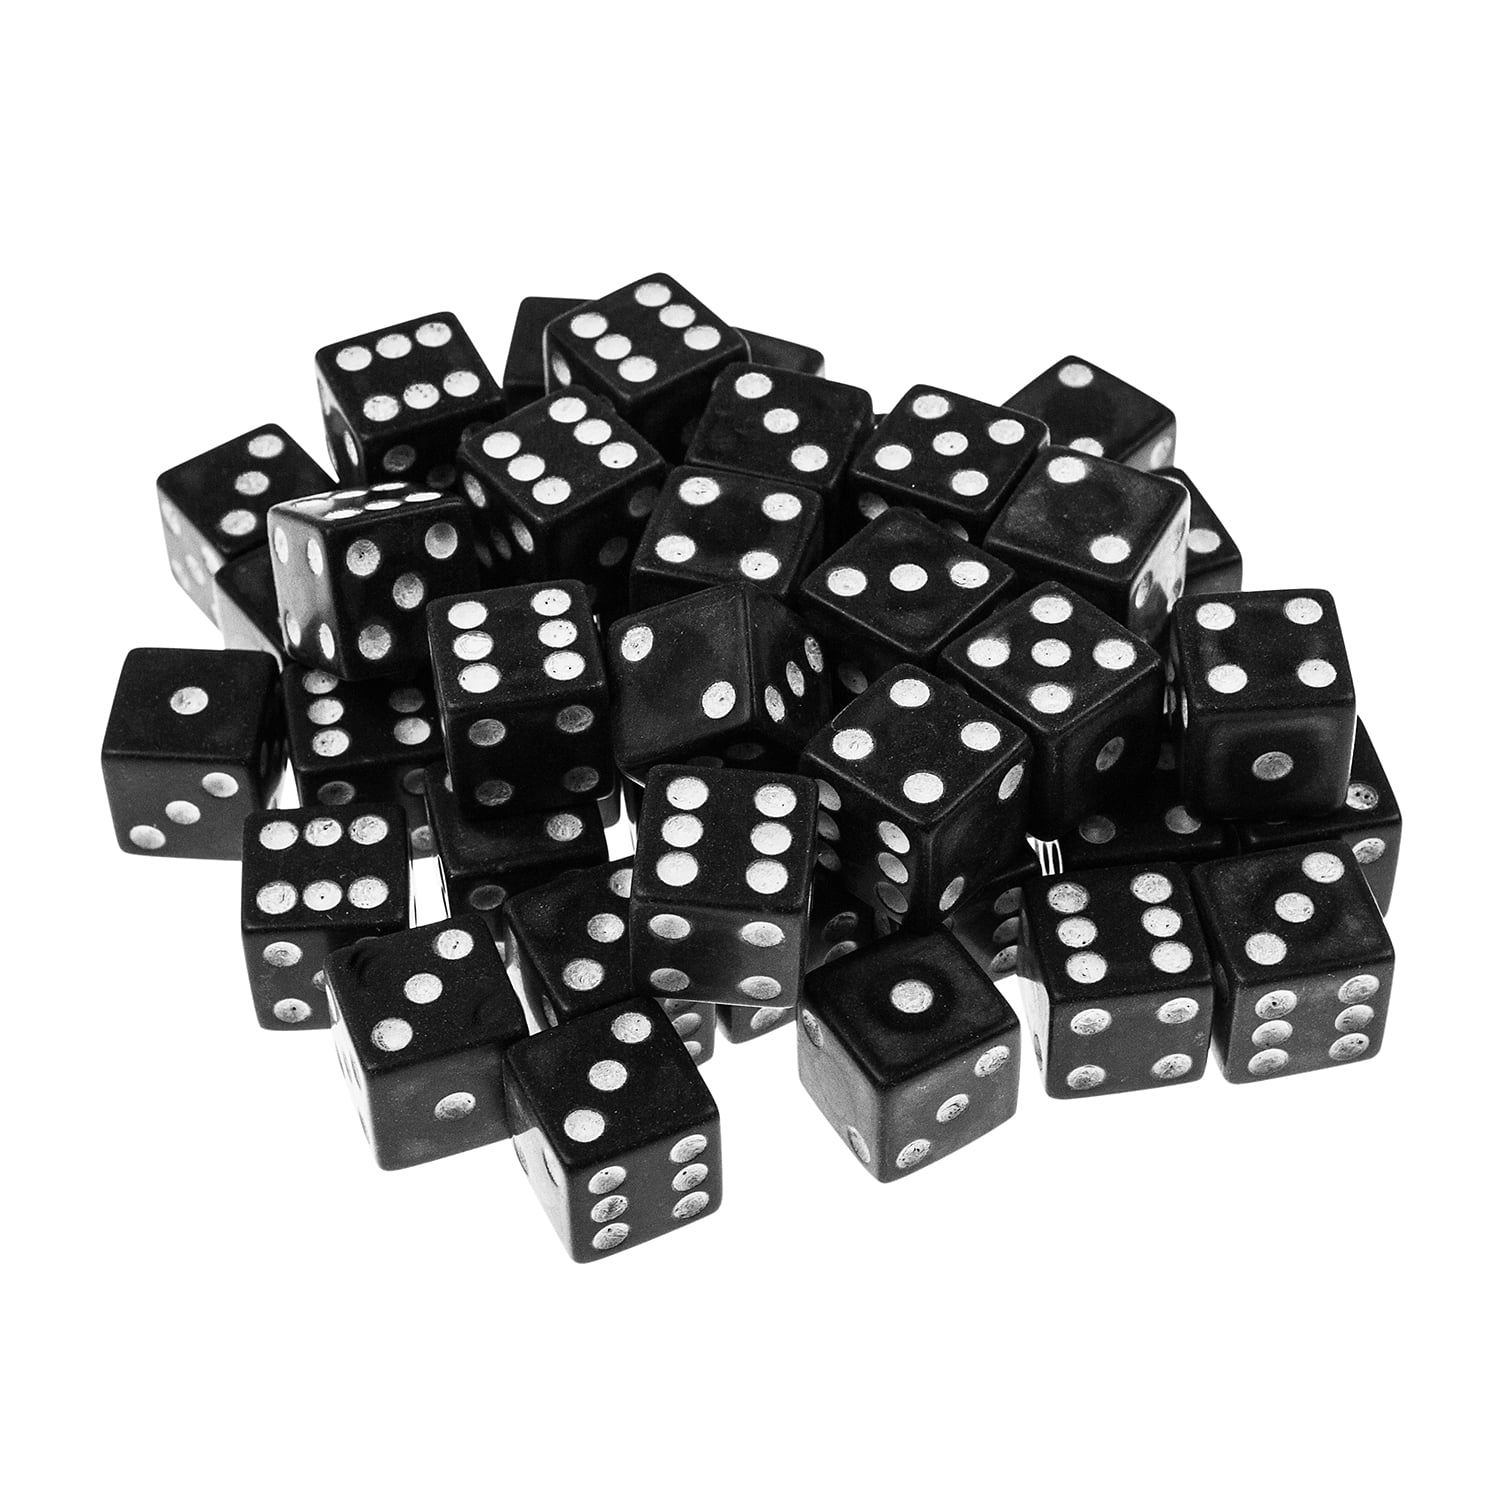 Black Dice with White Pips 2 Die Set 16mm Game Supply 